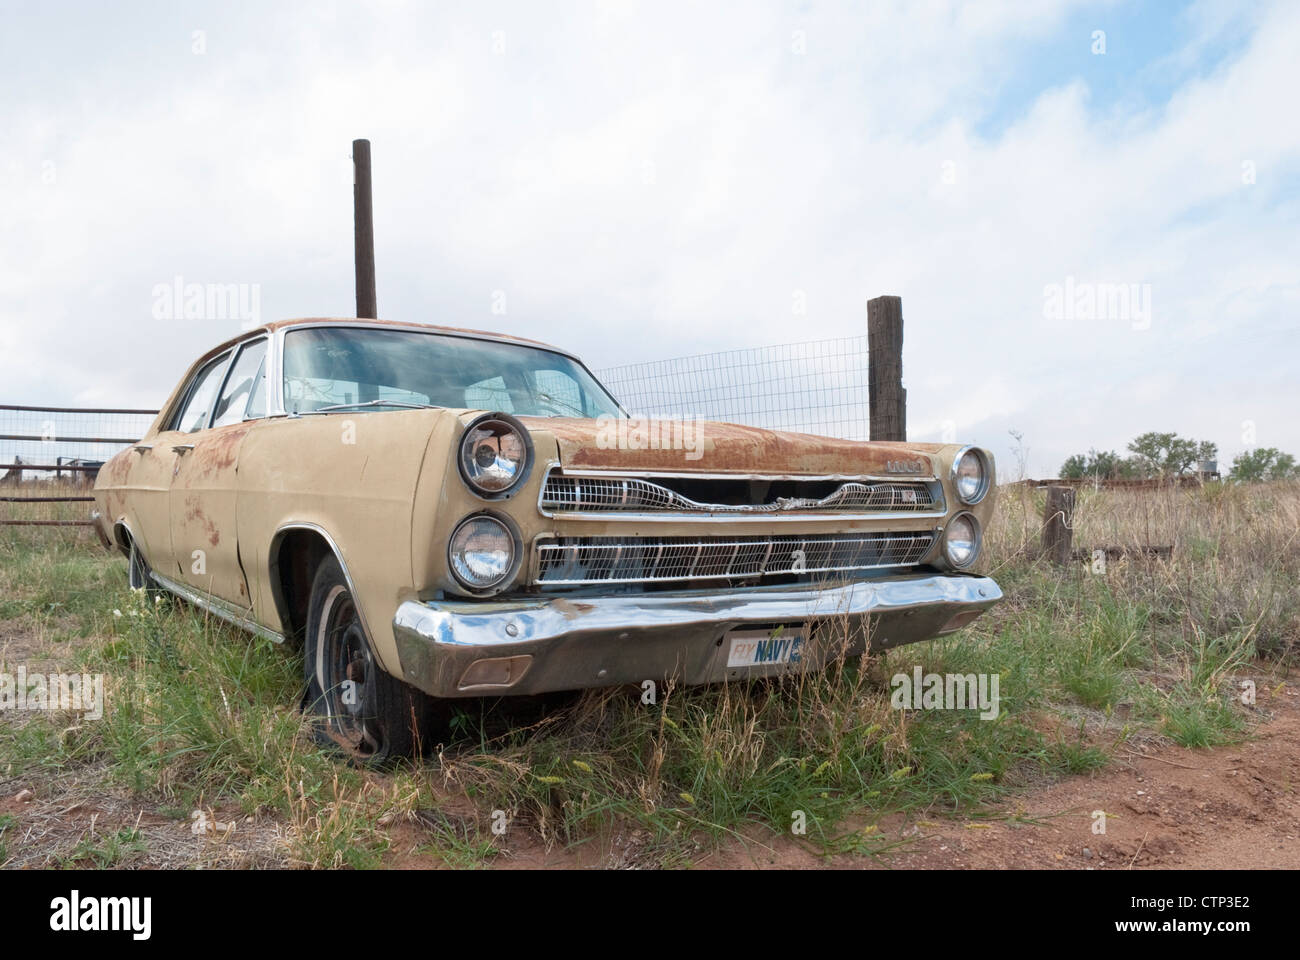 An old Ford Fairlane sits in a vacant lot in the mostly uninhabited rural town of Taiban, New Mexico. Stock Photo